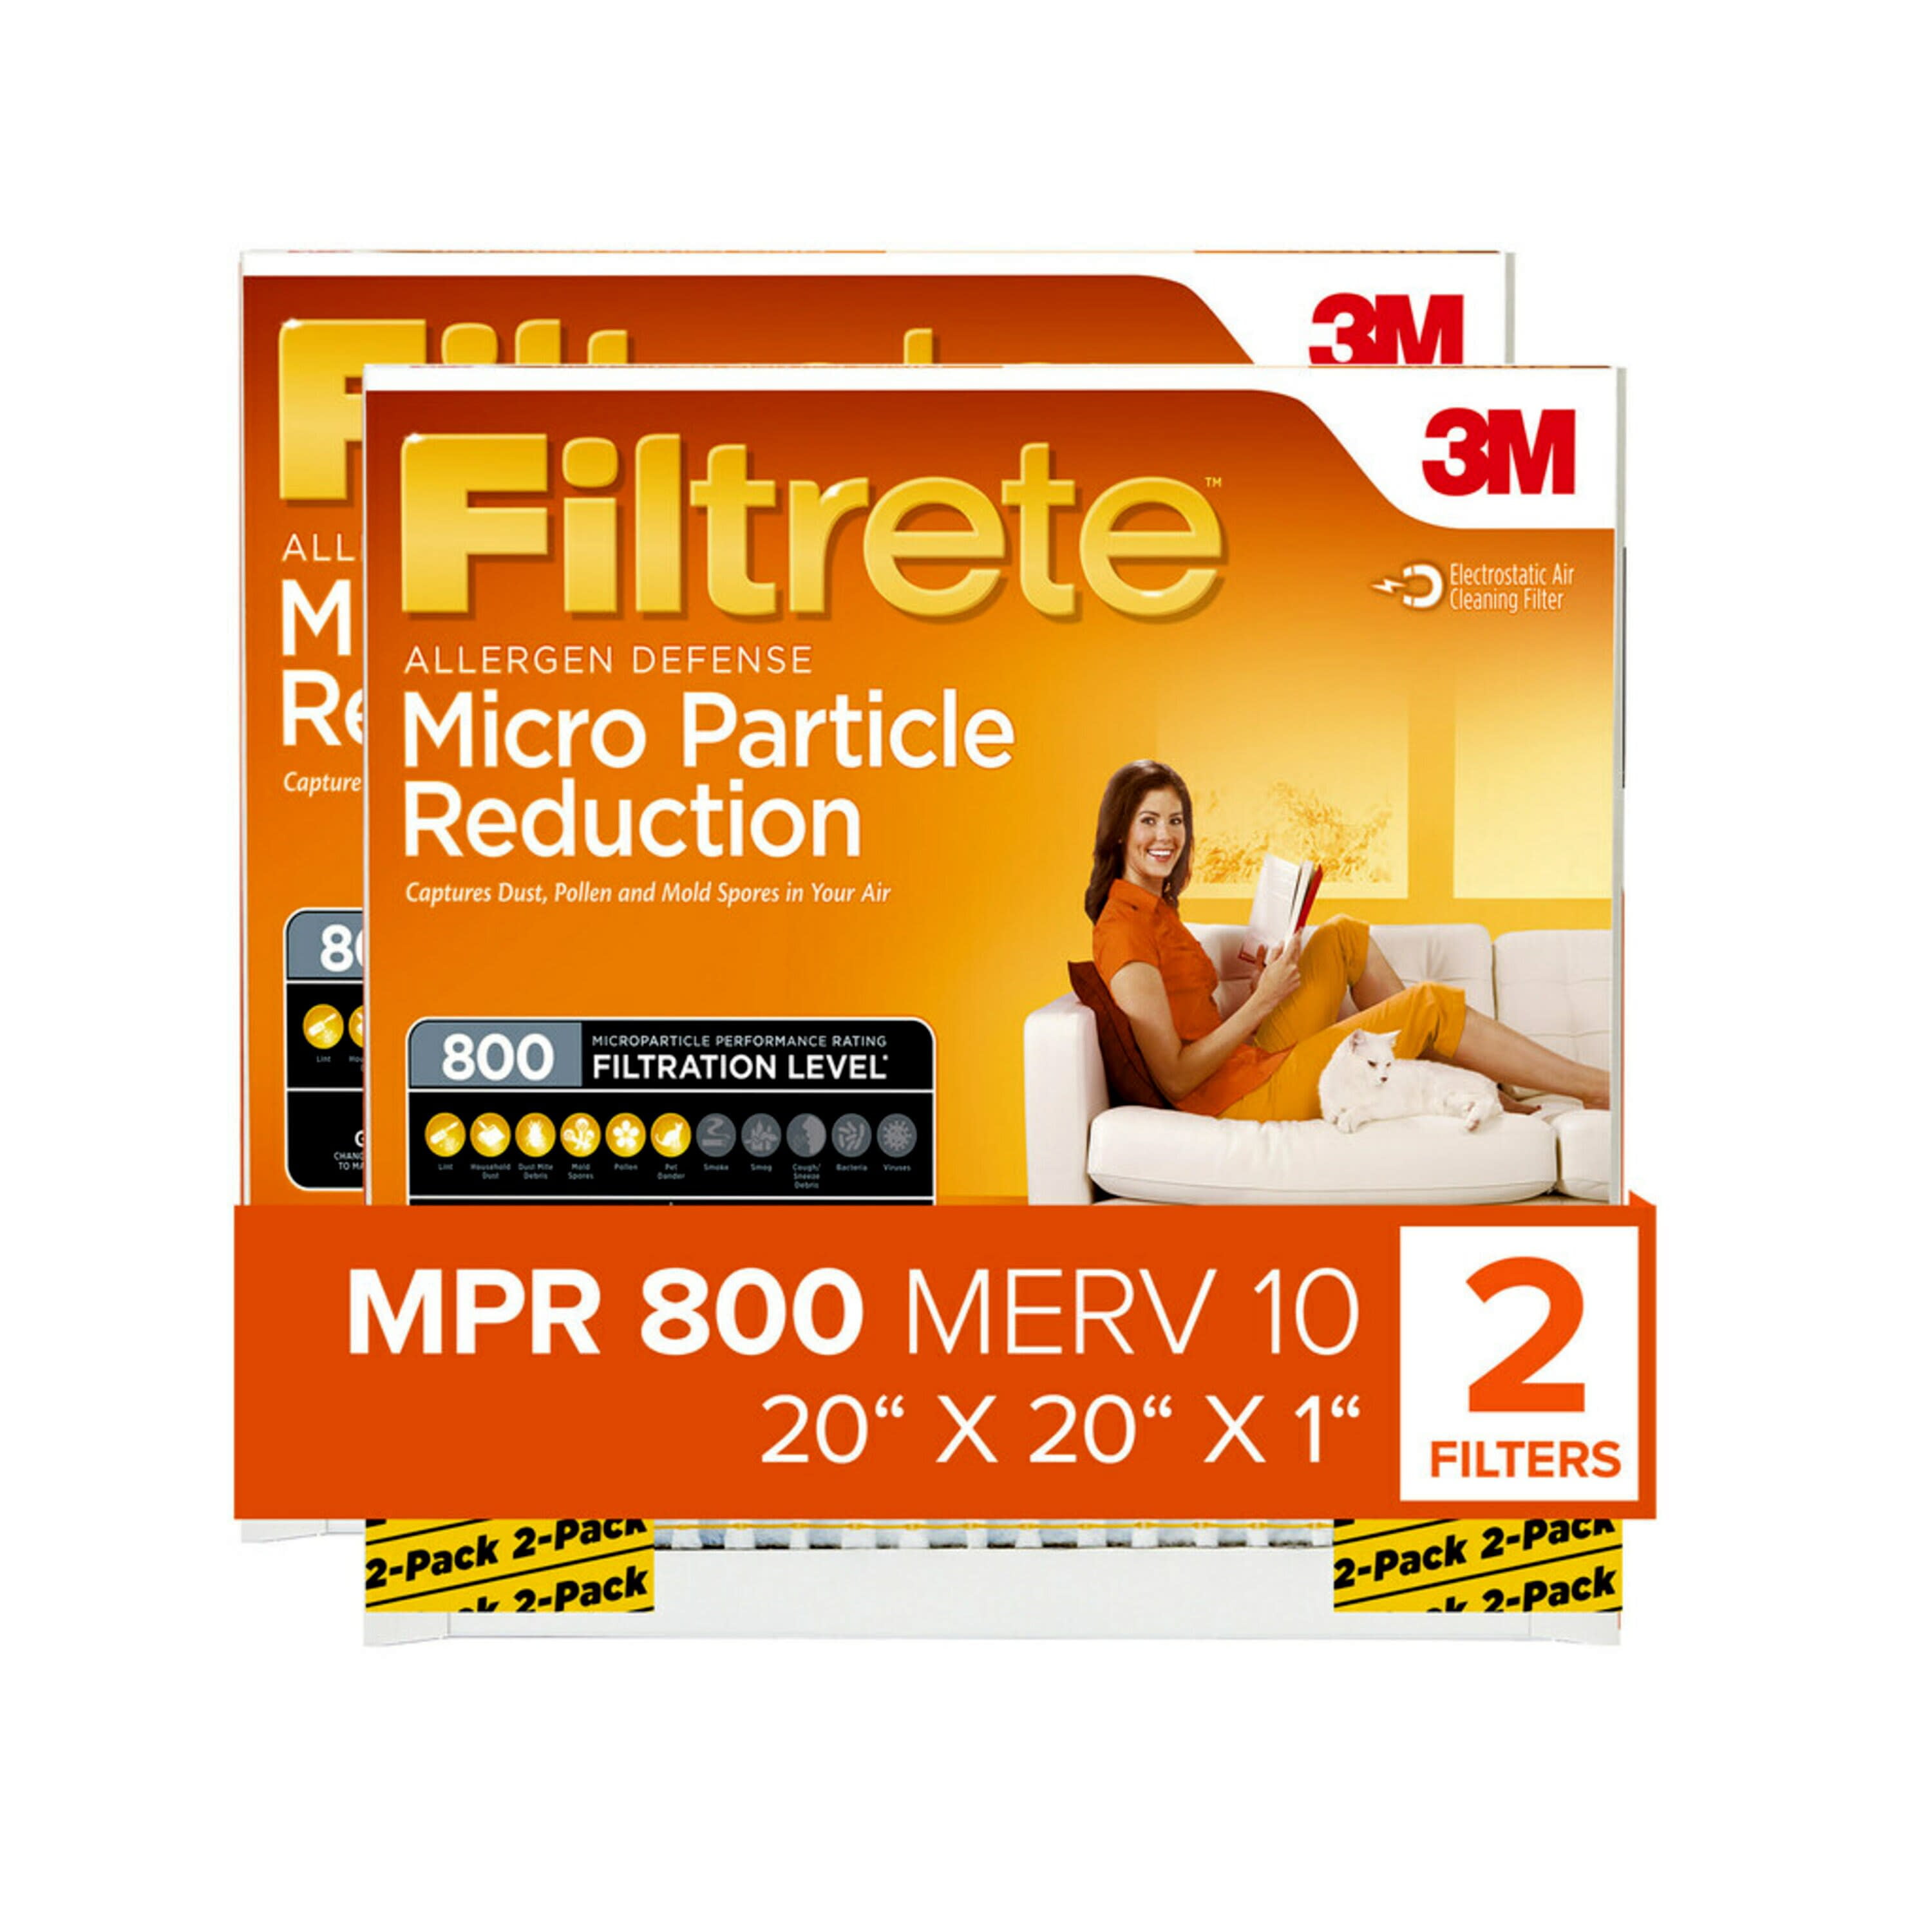 Filtrete by 3M, 20x20x1, MERV 10, Micro Particle Reduction HVAC Furnace Air Filter, Captures Pet Dander and Pollen, 800 MPR, 2 Filters